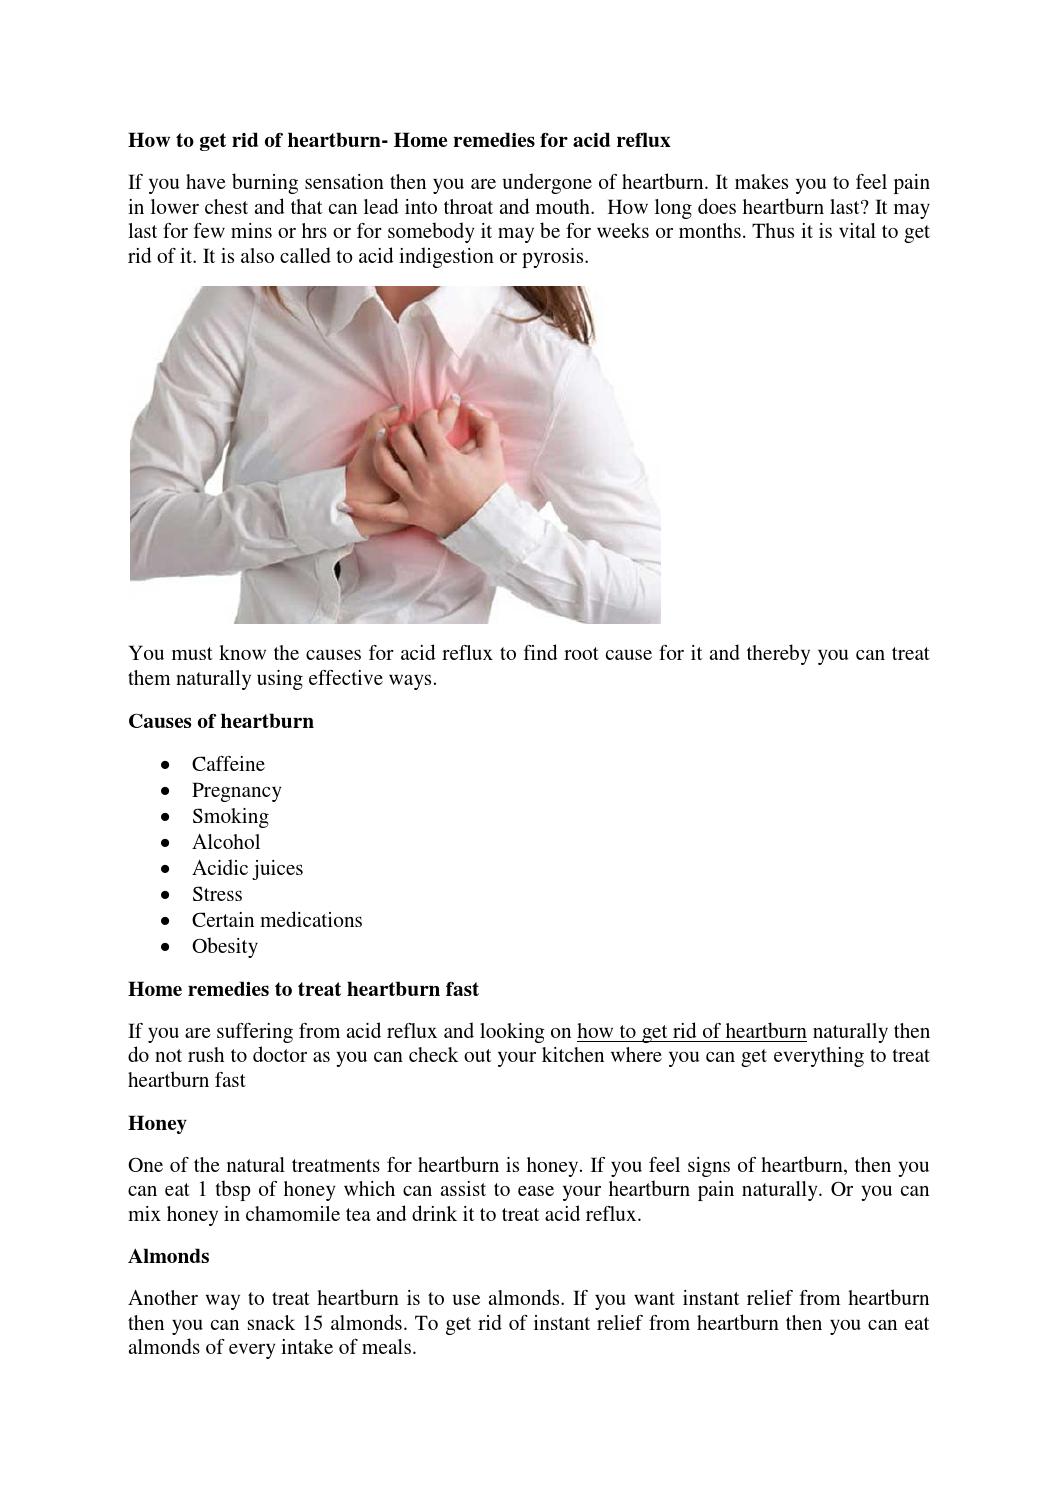 How to get rid of heartburn home remedies to cure by ...